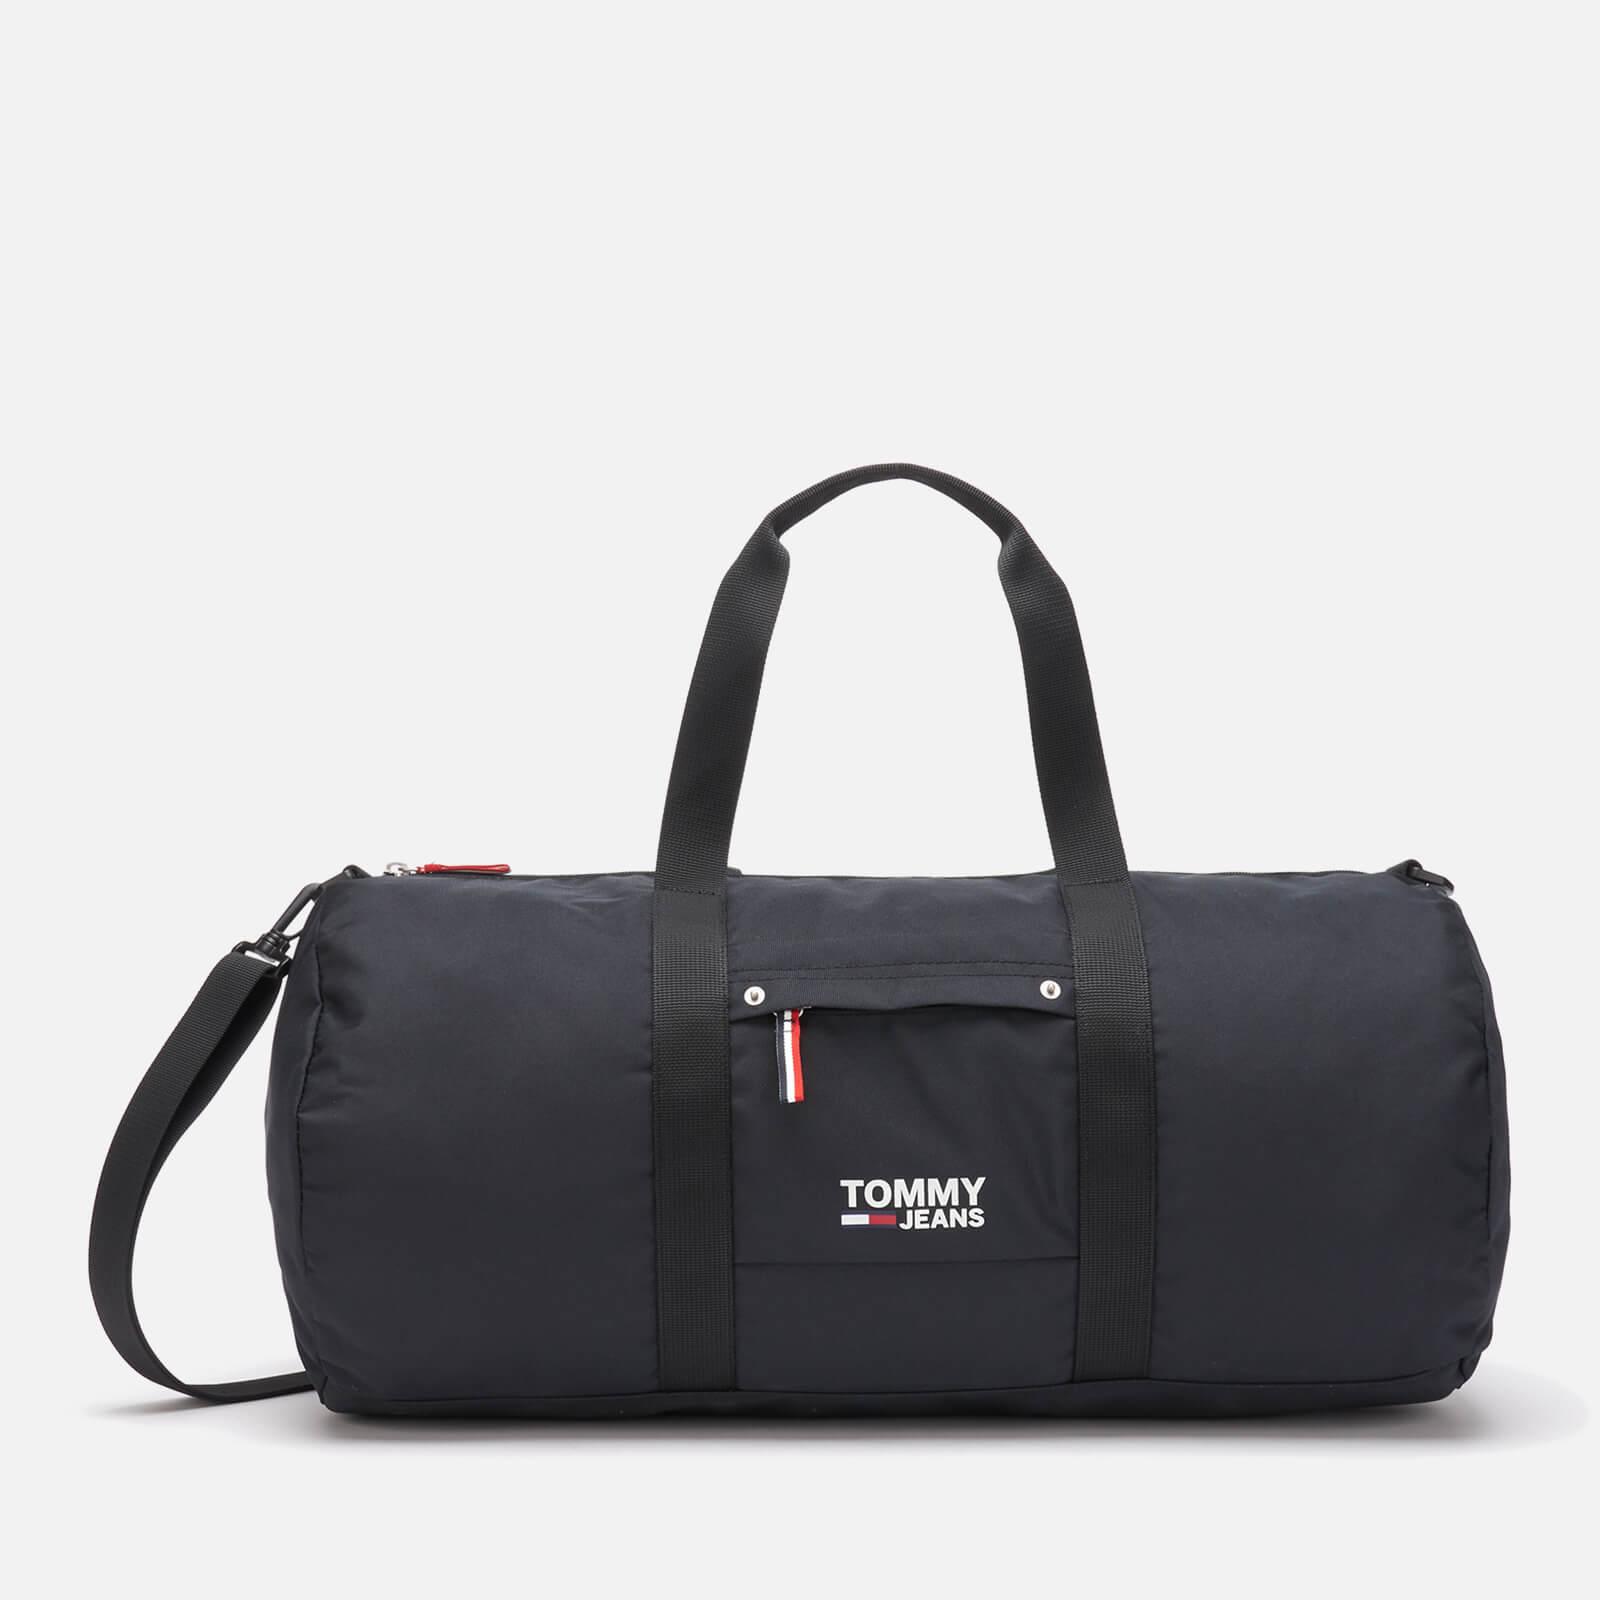 Tommy Hilfiger Cool City Duffle Bag in Black for Men - Lyst